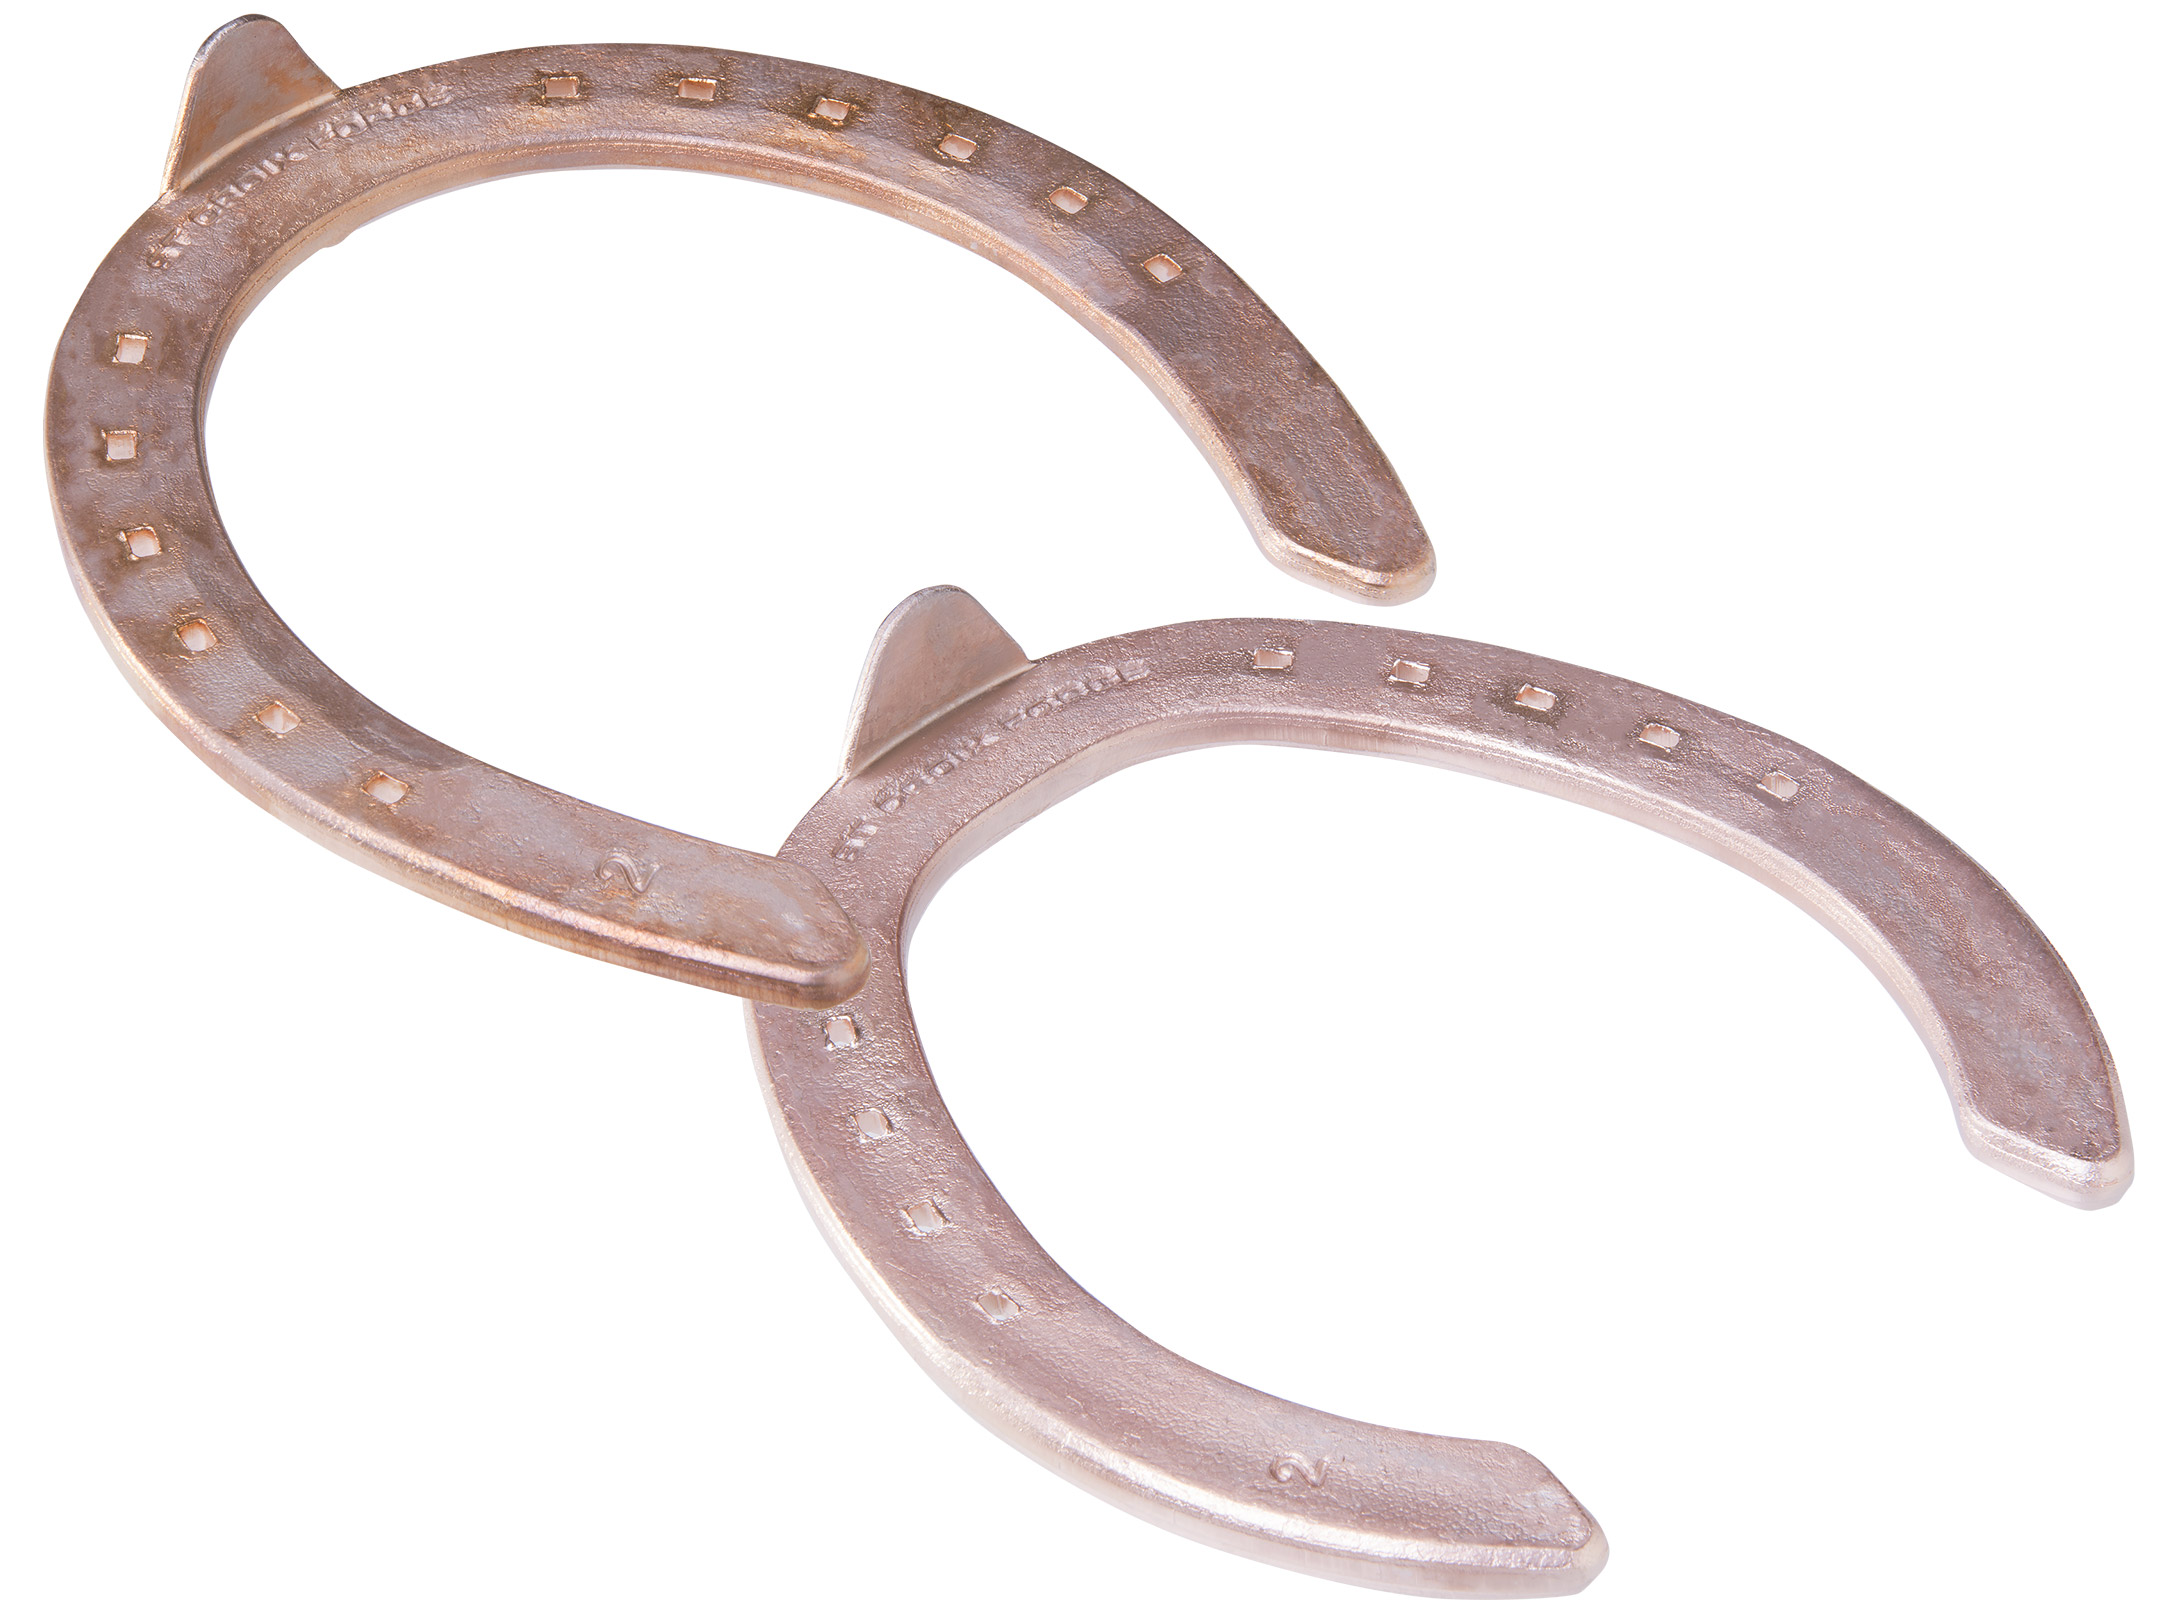 St. Croix Rapid Hard Metal horseshoes, front and hind,hoof side view